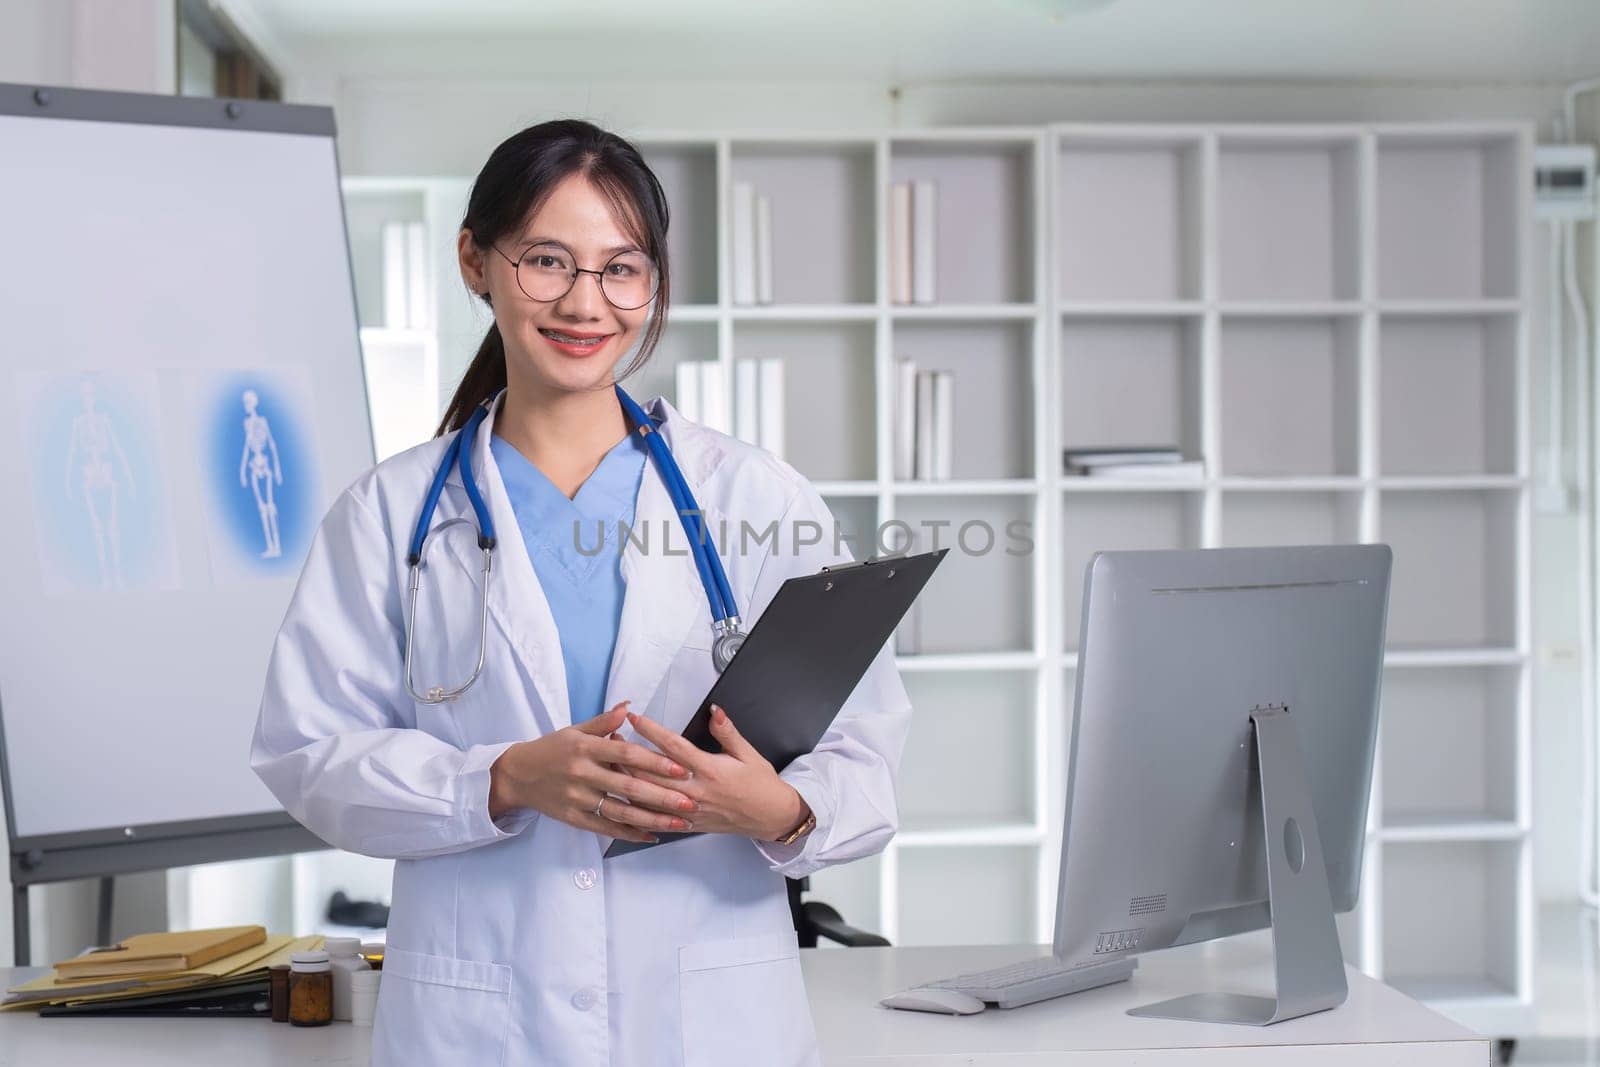 Portrait of a smiling female doctor holding a clipboard Wear a medical coat and stethoscope in a hospital office. Medical and healthcare concept.